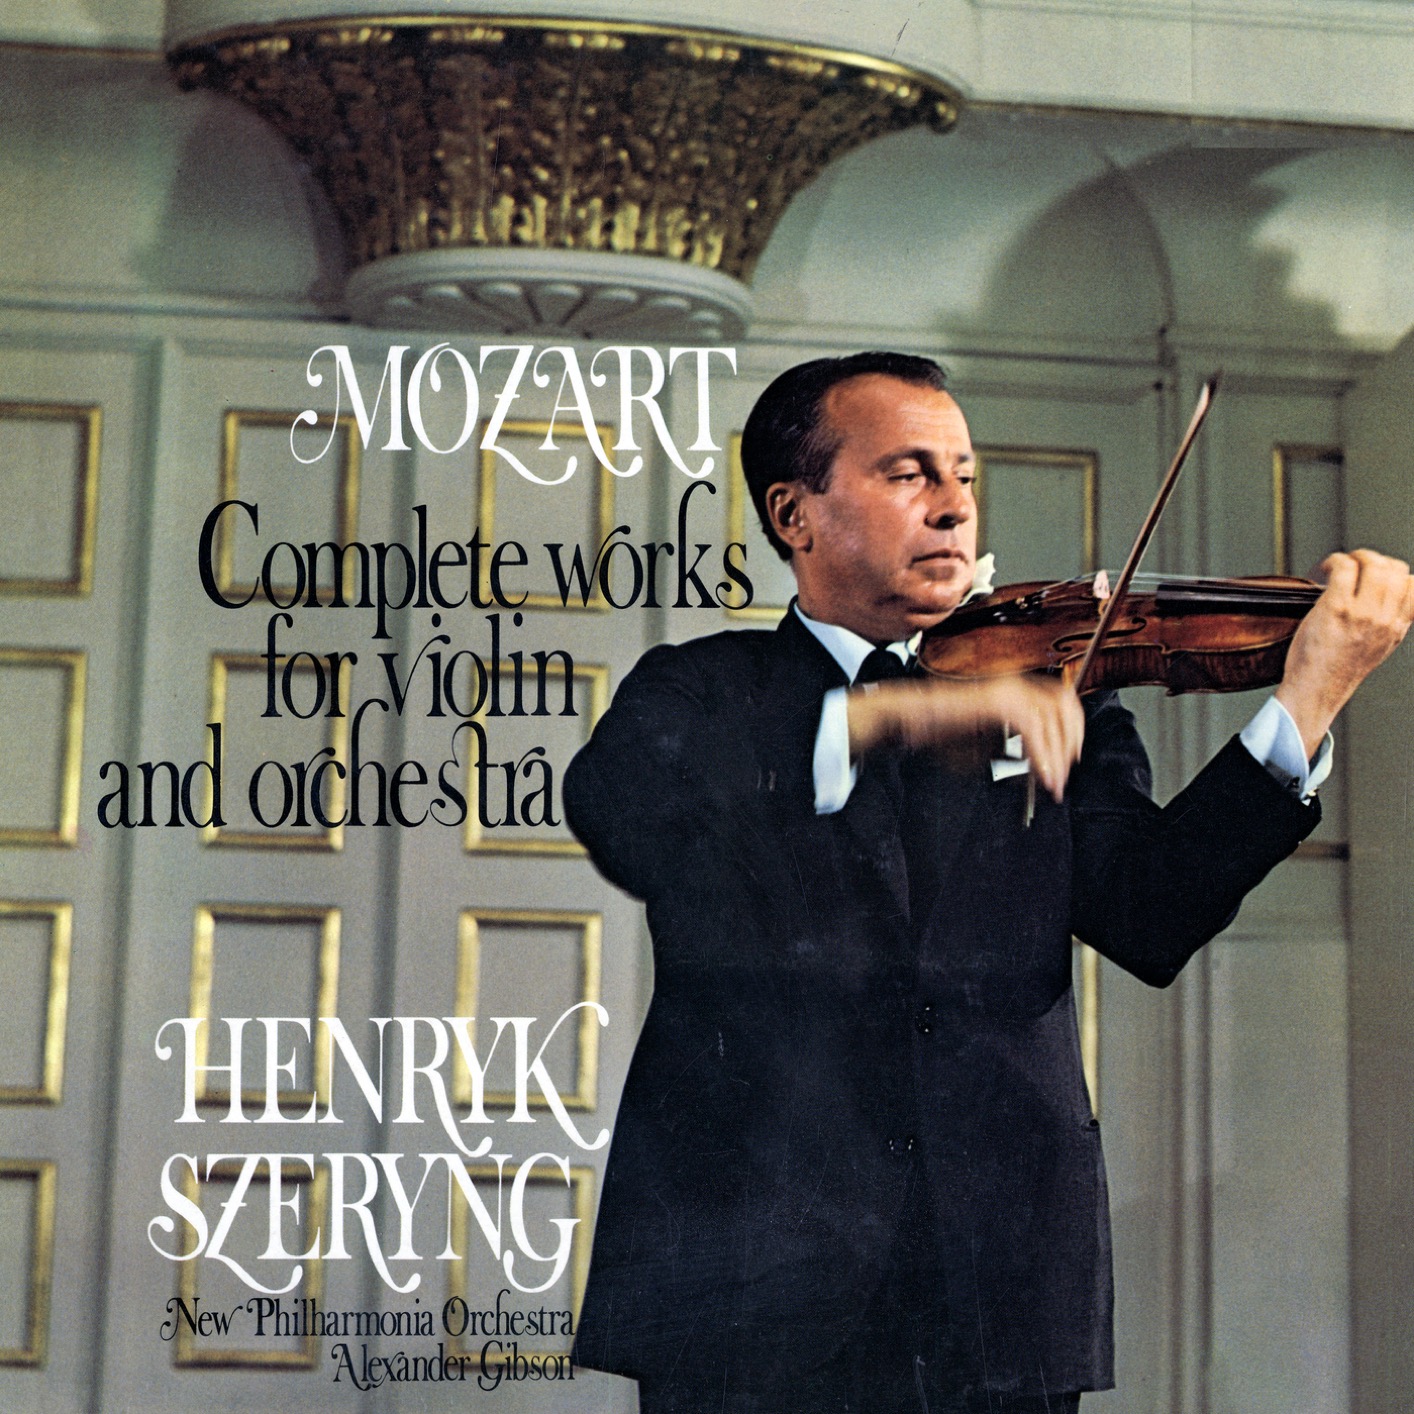 Henryk Szeryng - Mozart: Complete Works for Violin and Orchestra (Remastered) (2018) [FLAC 24bit/96kHz]